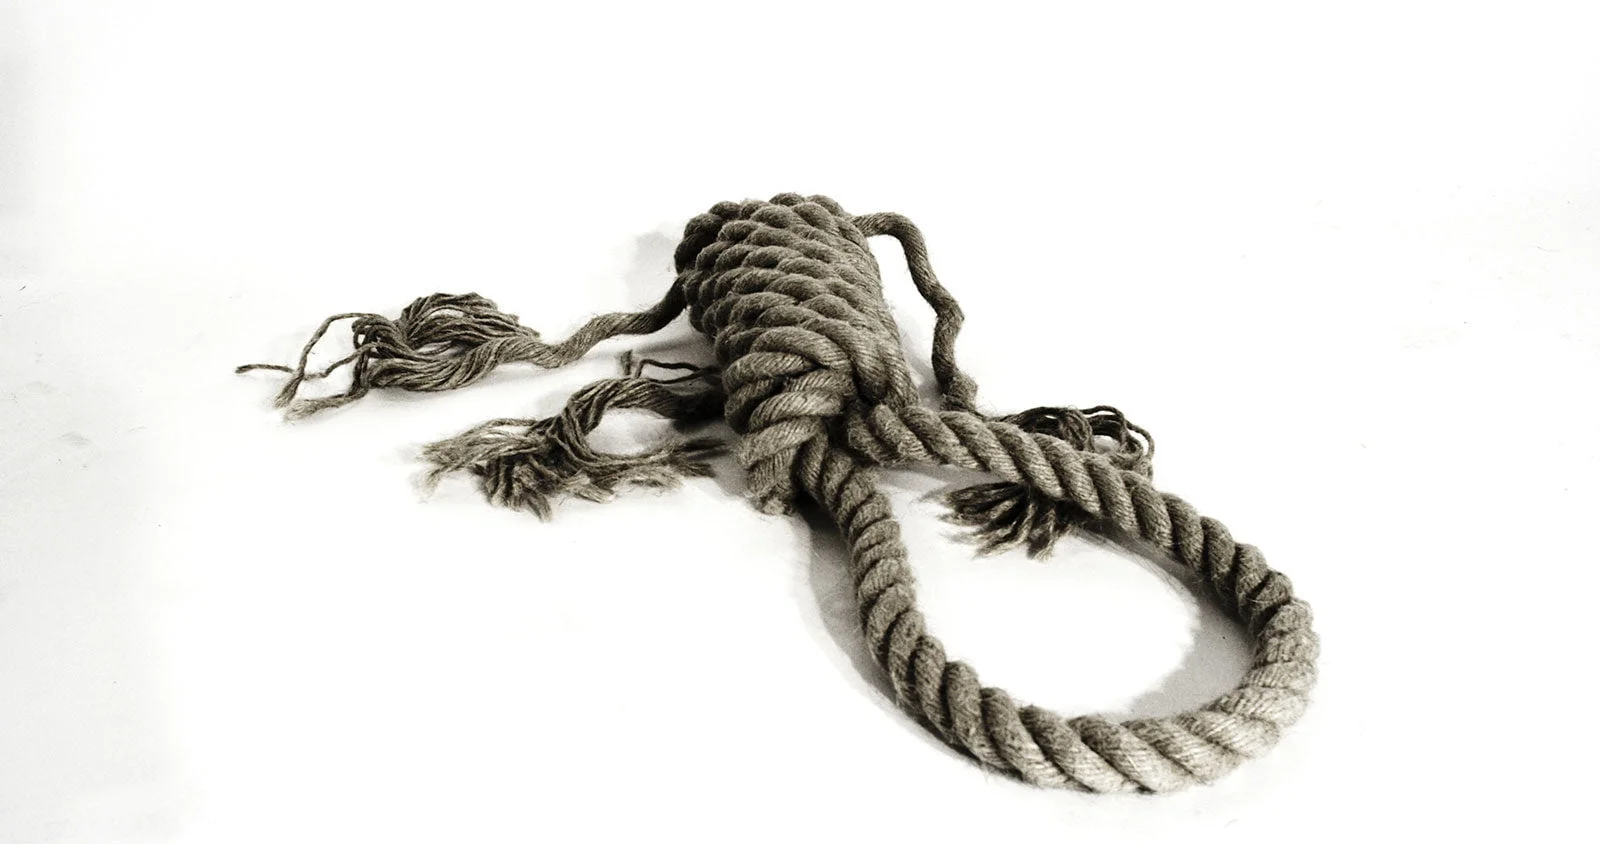 A hangman's noose on a white background